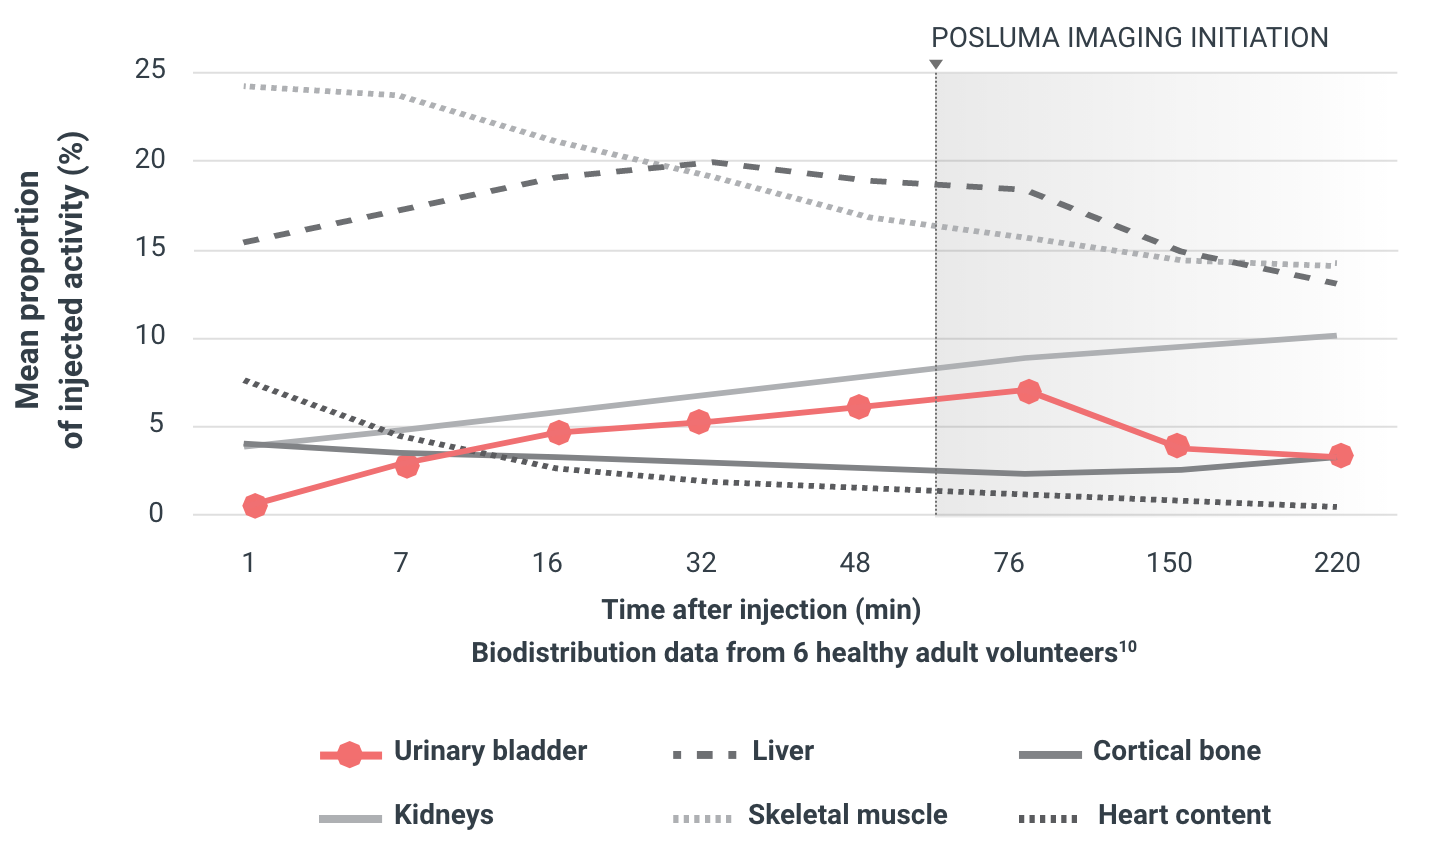 Line graph showing low urinary bladder activity with POSLUMA